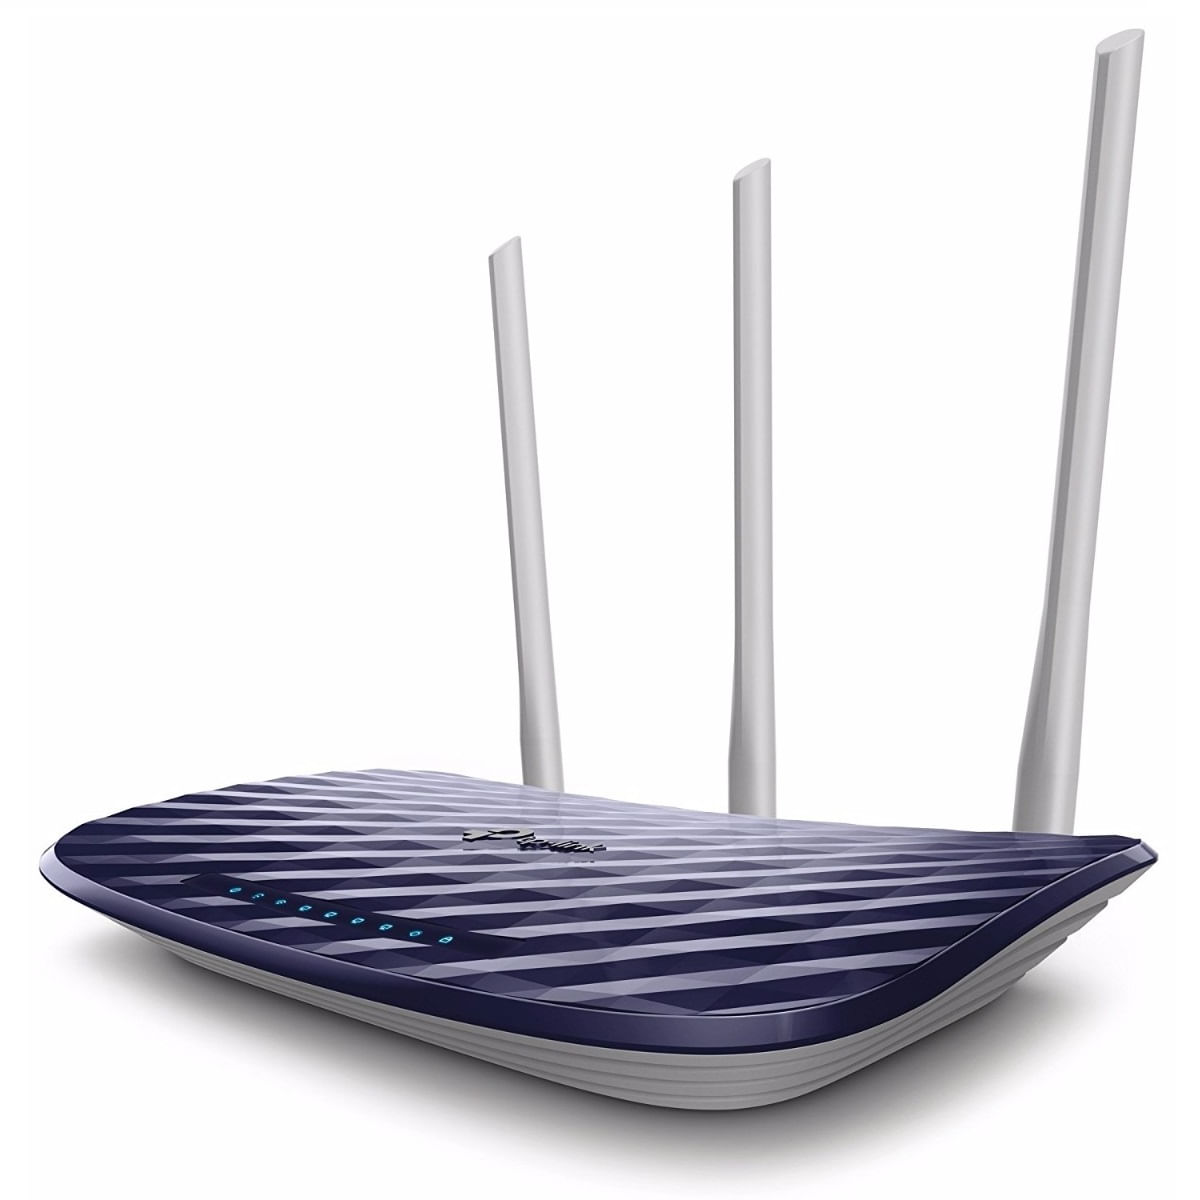 Router TP-Link Archer C20 Wireless Dual Band AC750